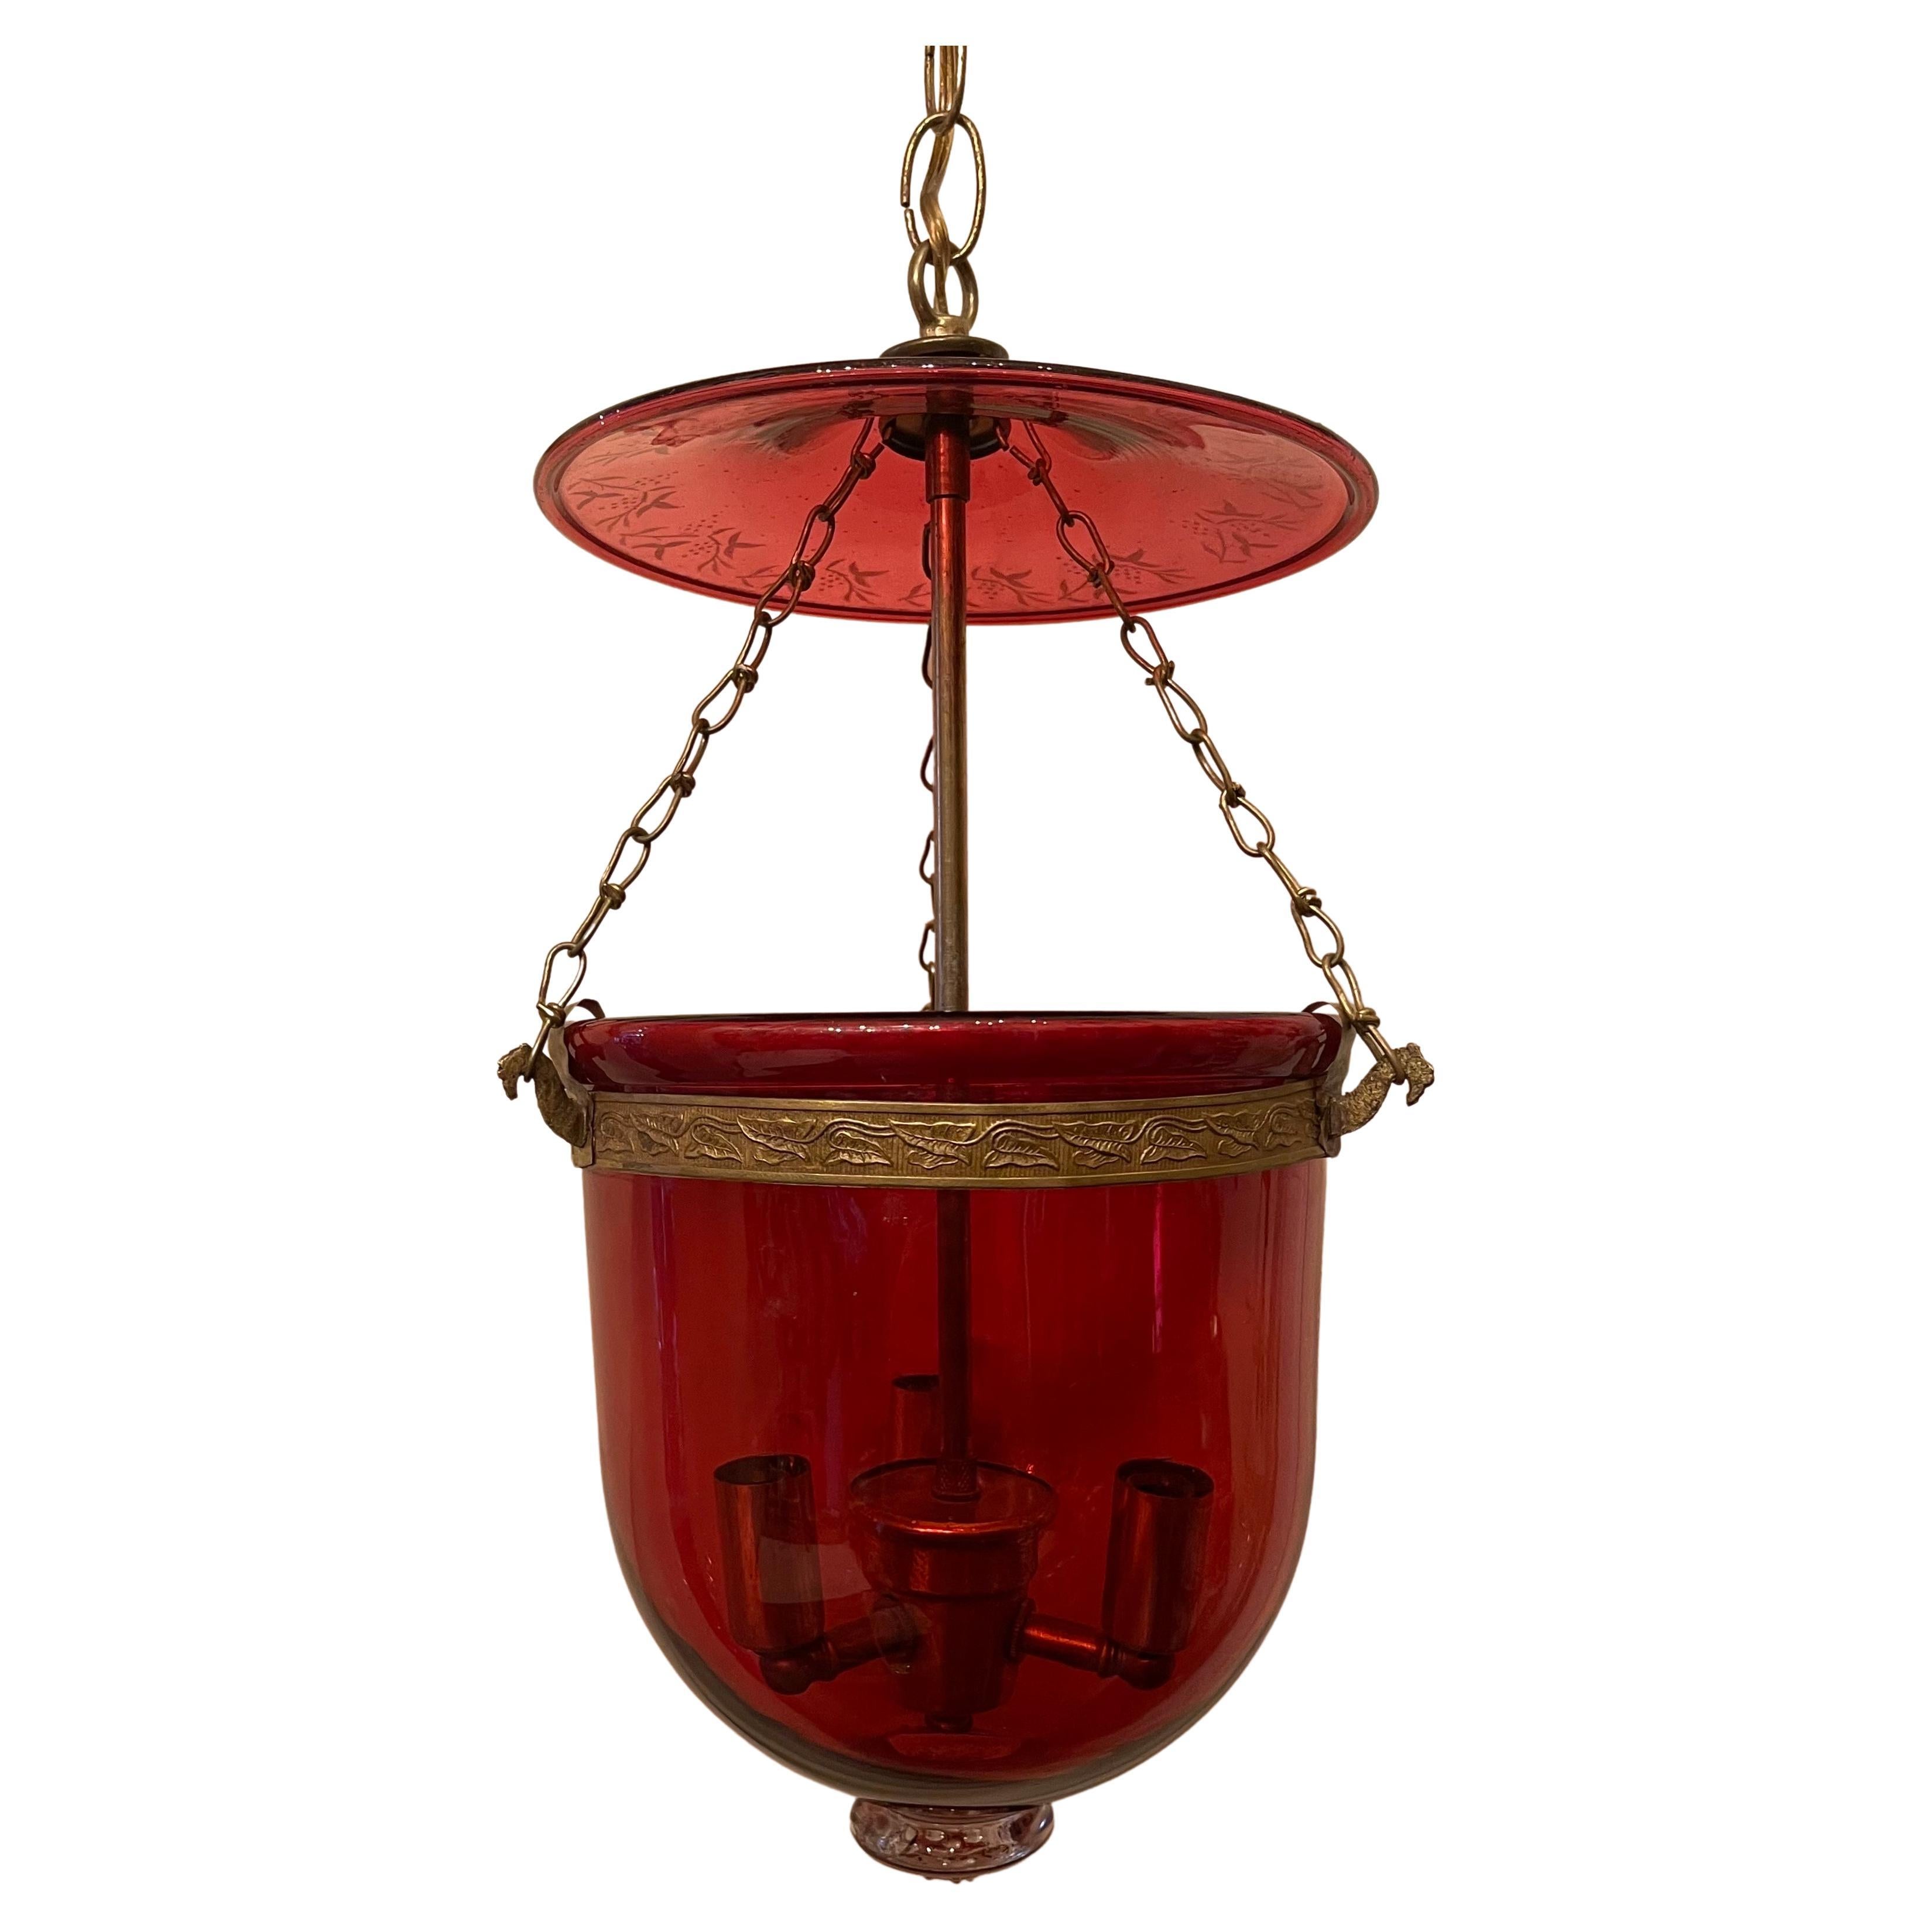 A Wonderful Val Saint Lambert Cranberry / Red With Etched Glass And Brass Hardware And Band Bell Jar Lantern Fixture Fitted With A 3 Candelabra Cluster, Rewired And Accompanied By Chain And Canopy.  